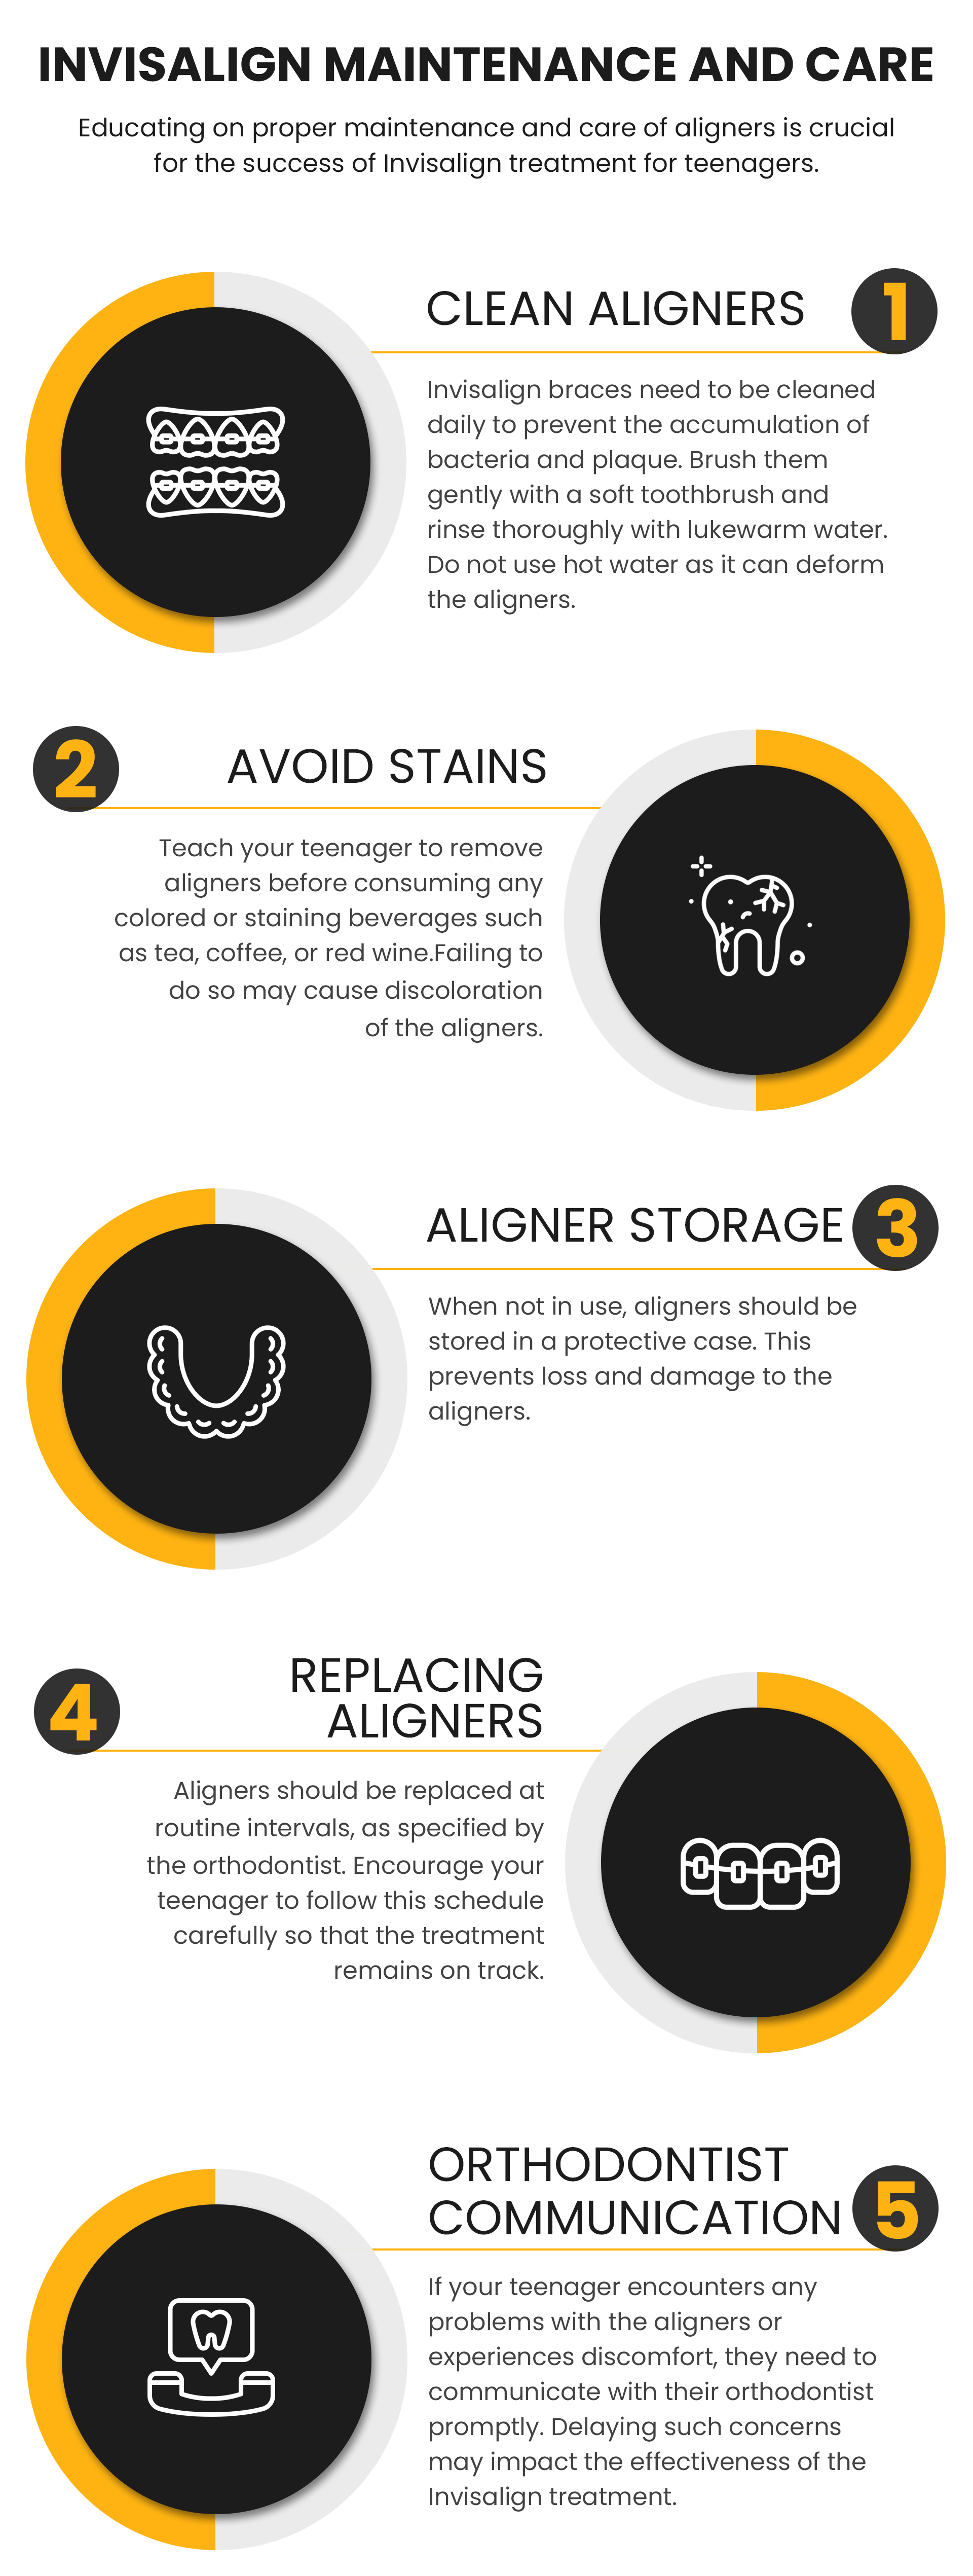 Invisalign Maintenance and Care 